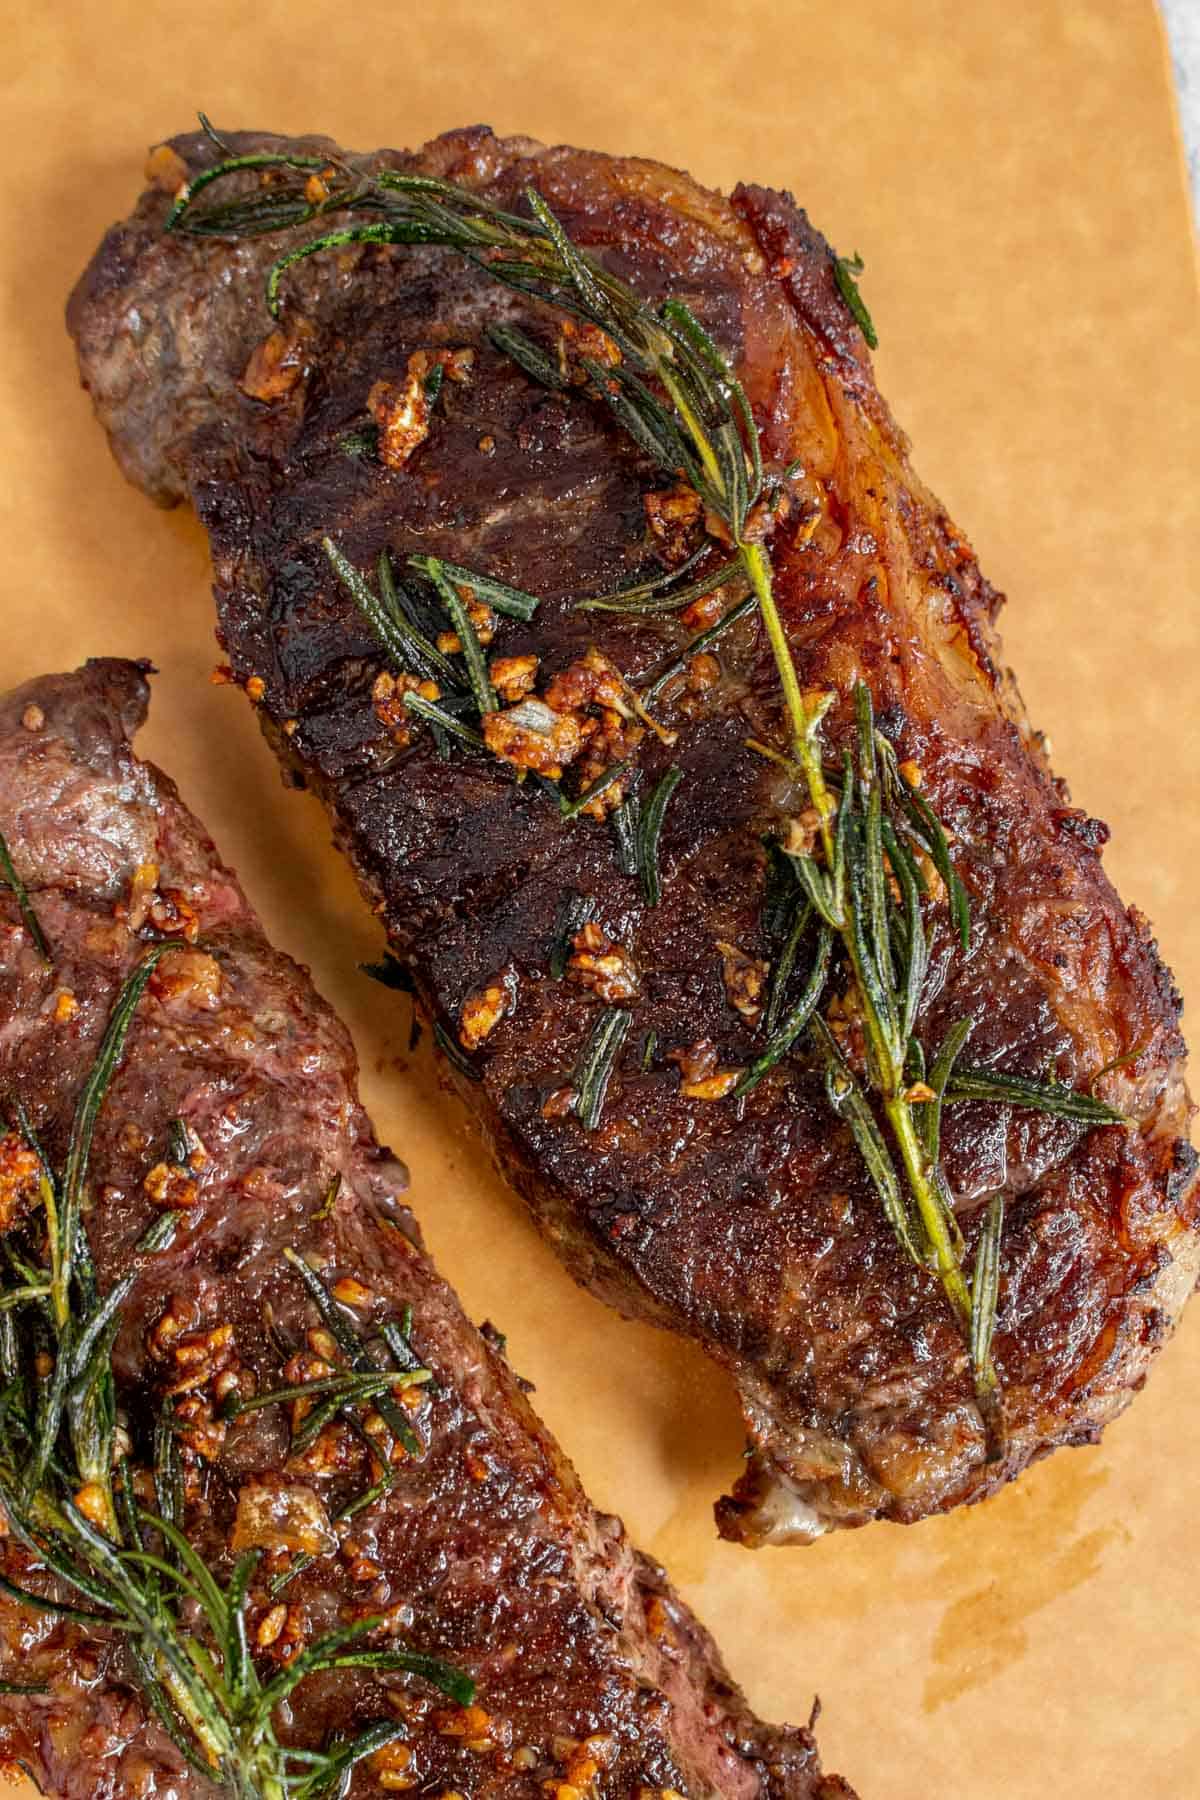 Overhead view of garlic butter steak with rosemary.